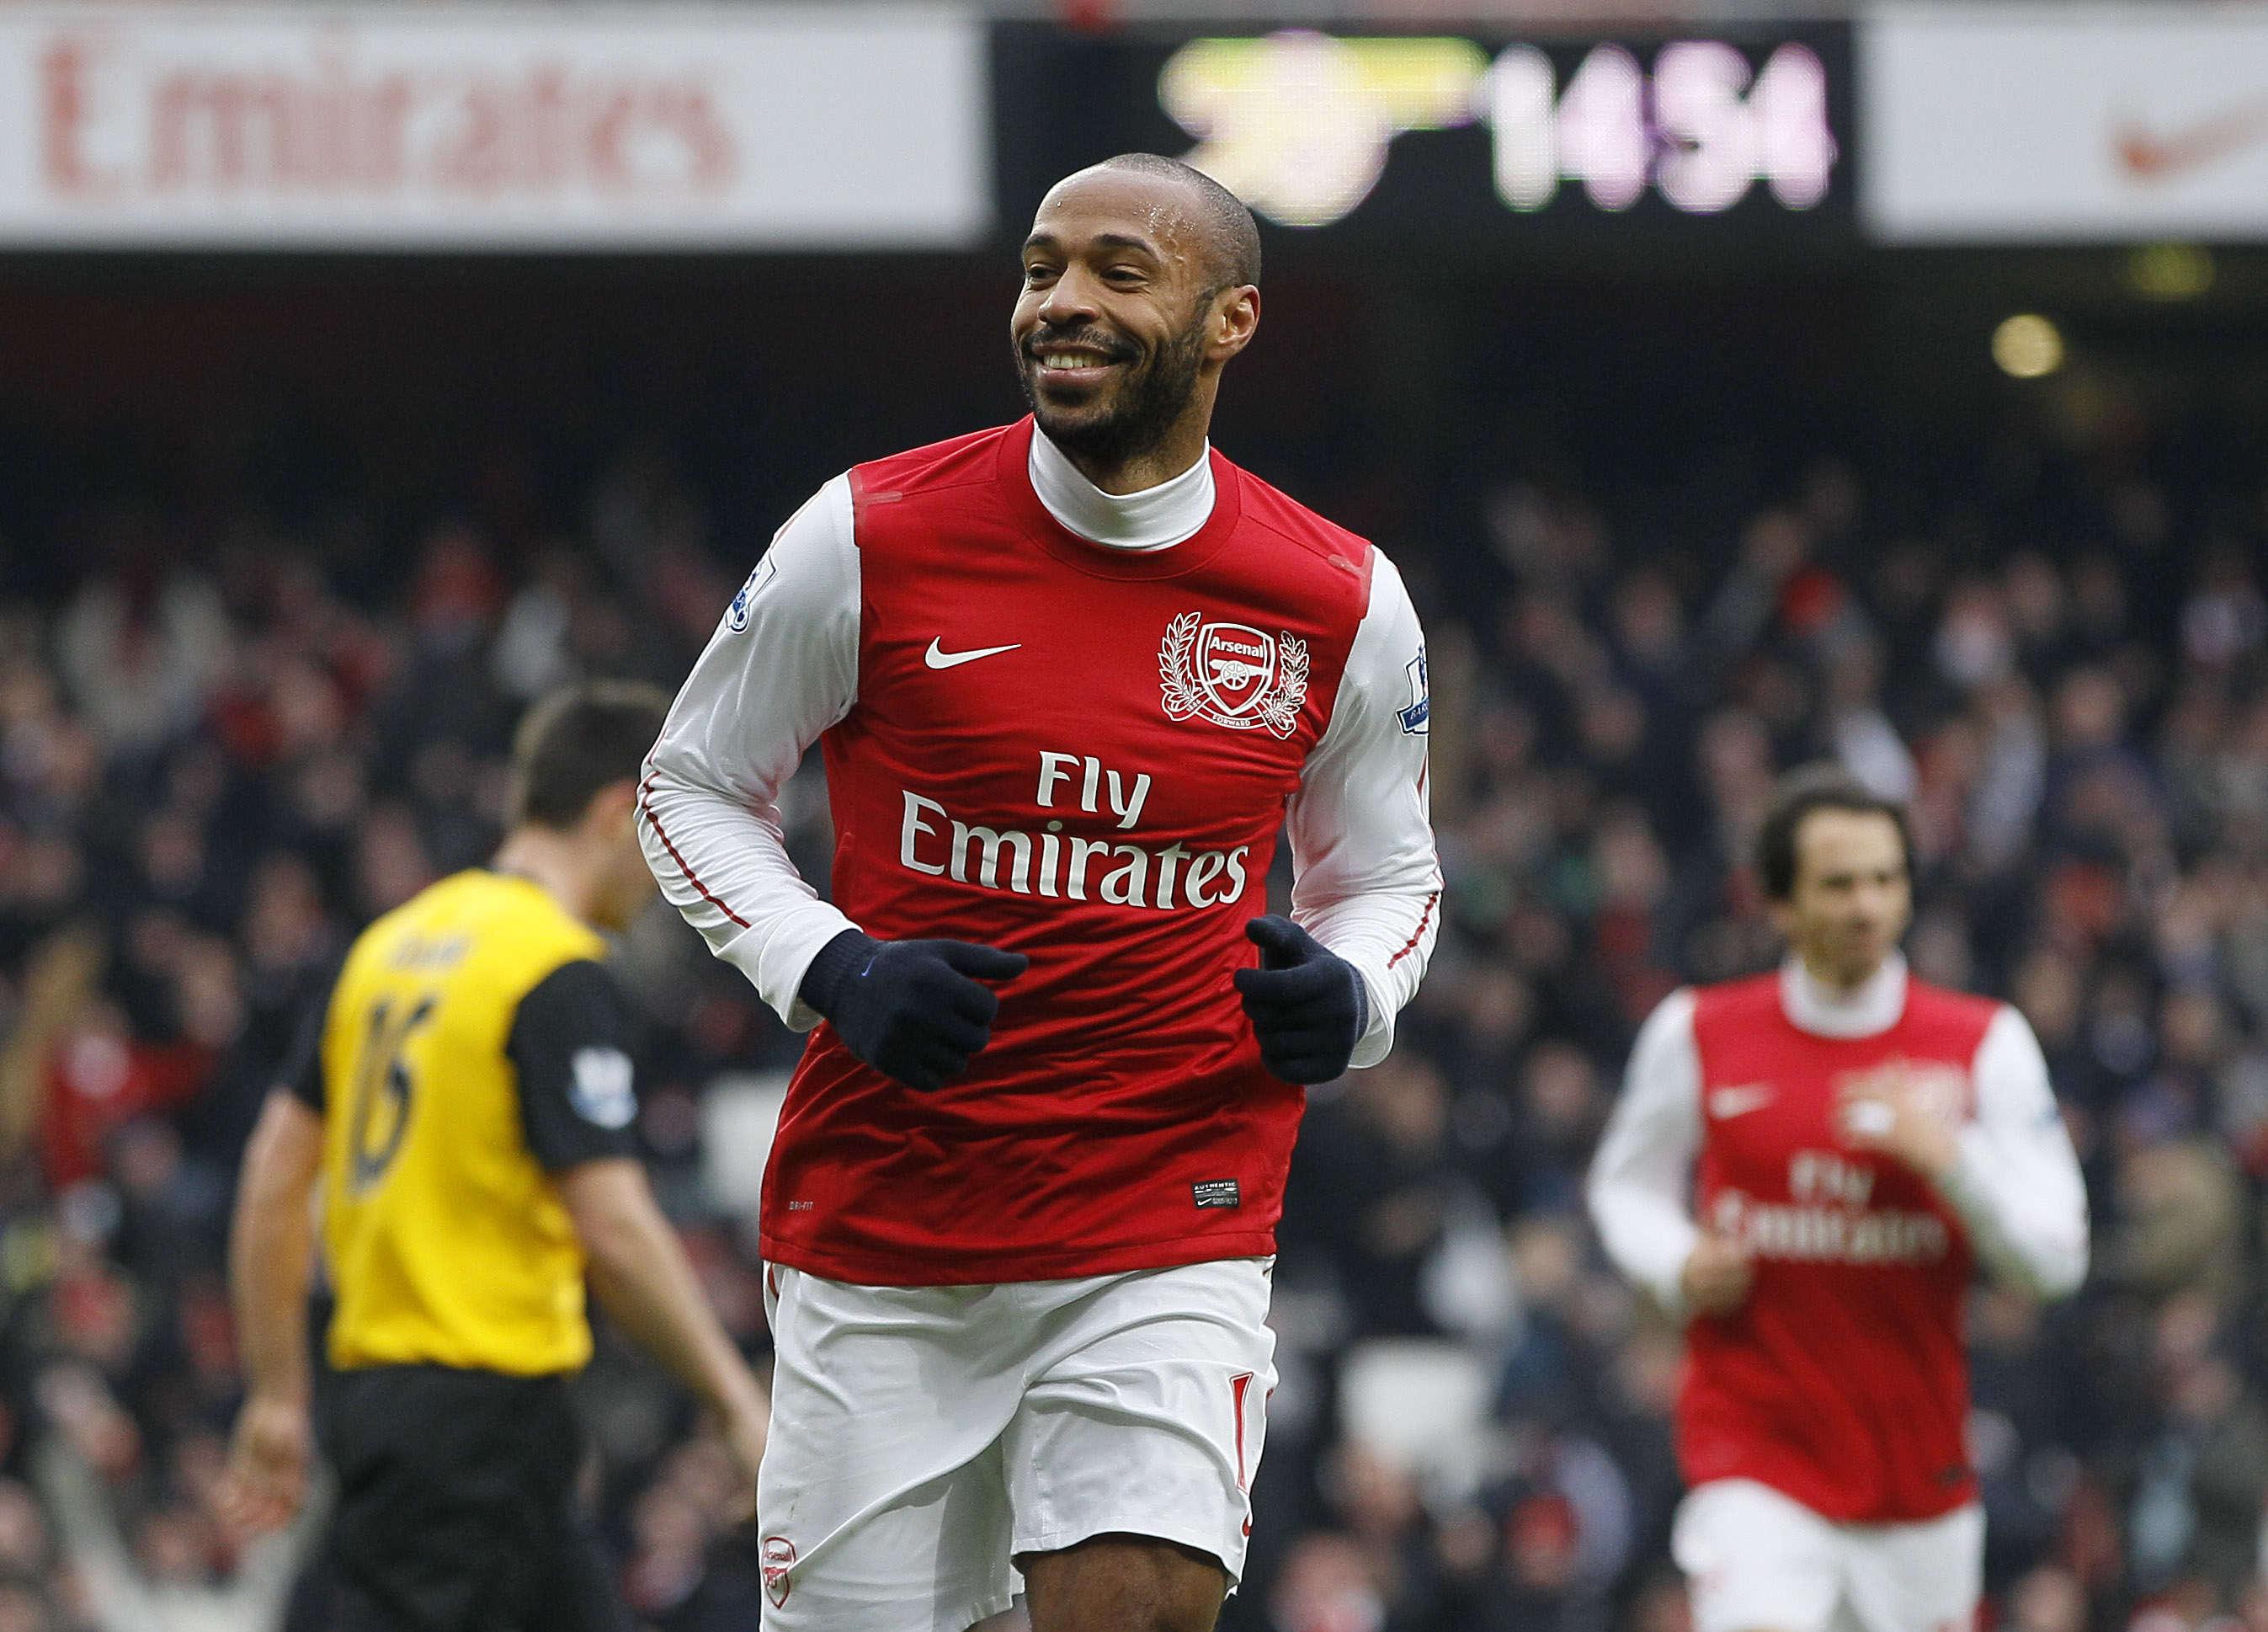 Thierry Henry Wallpaper High Resolution and Quality Download